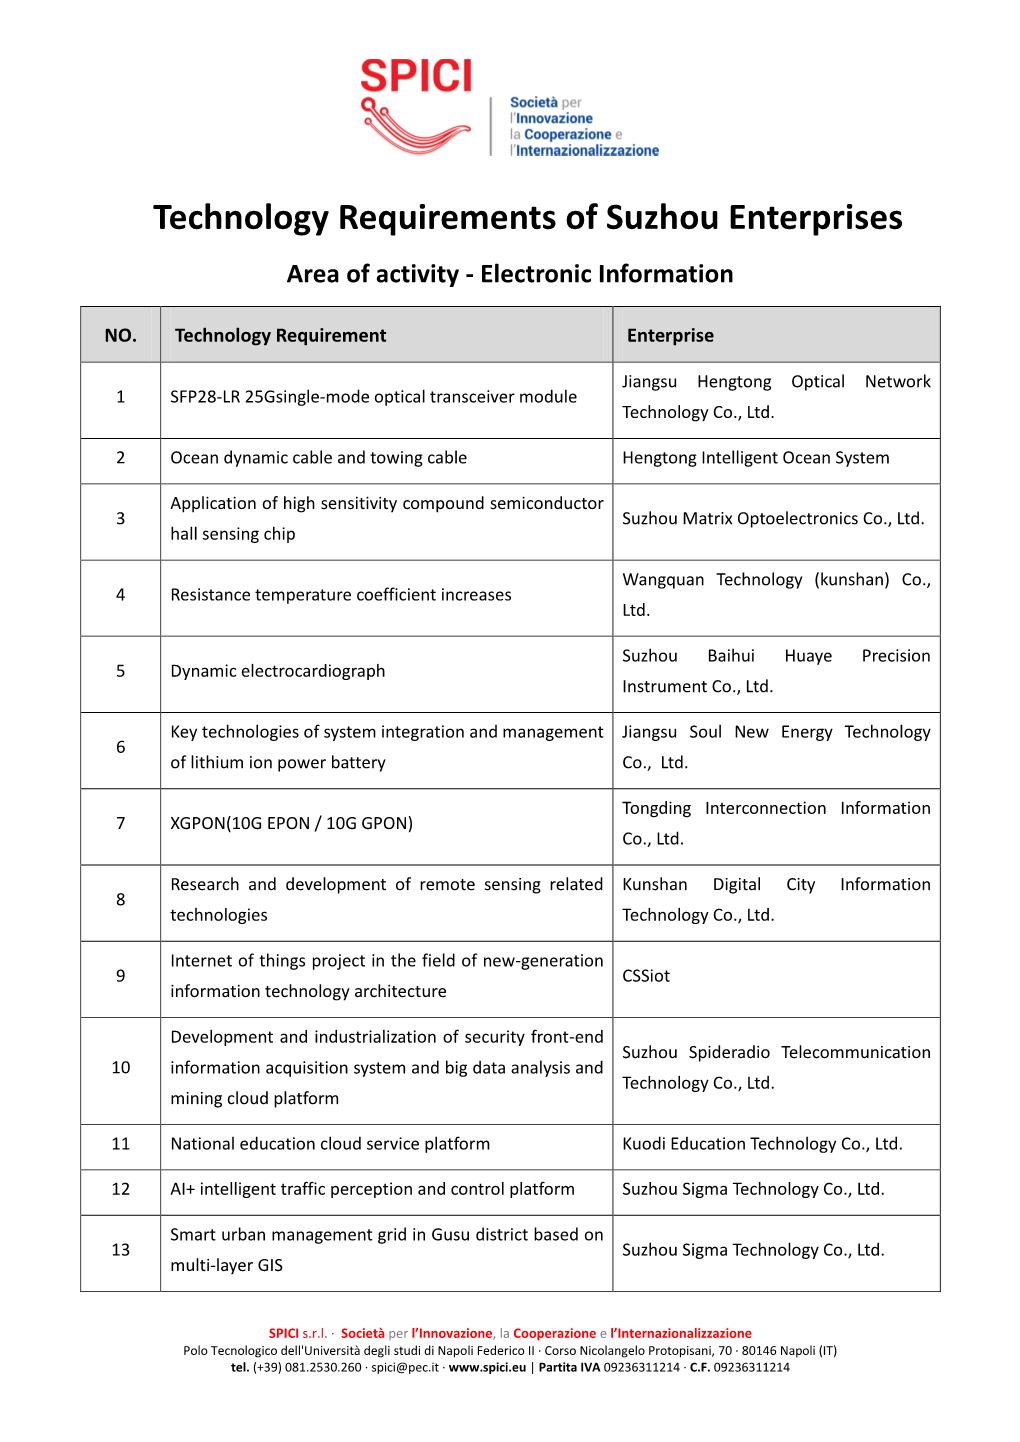 Technology Requirements of Suzhou Enterprises Area of Activity - Electronic Information